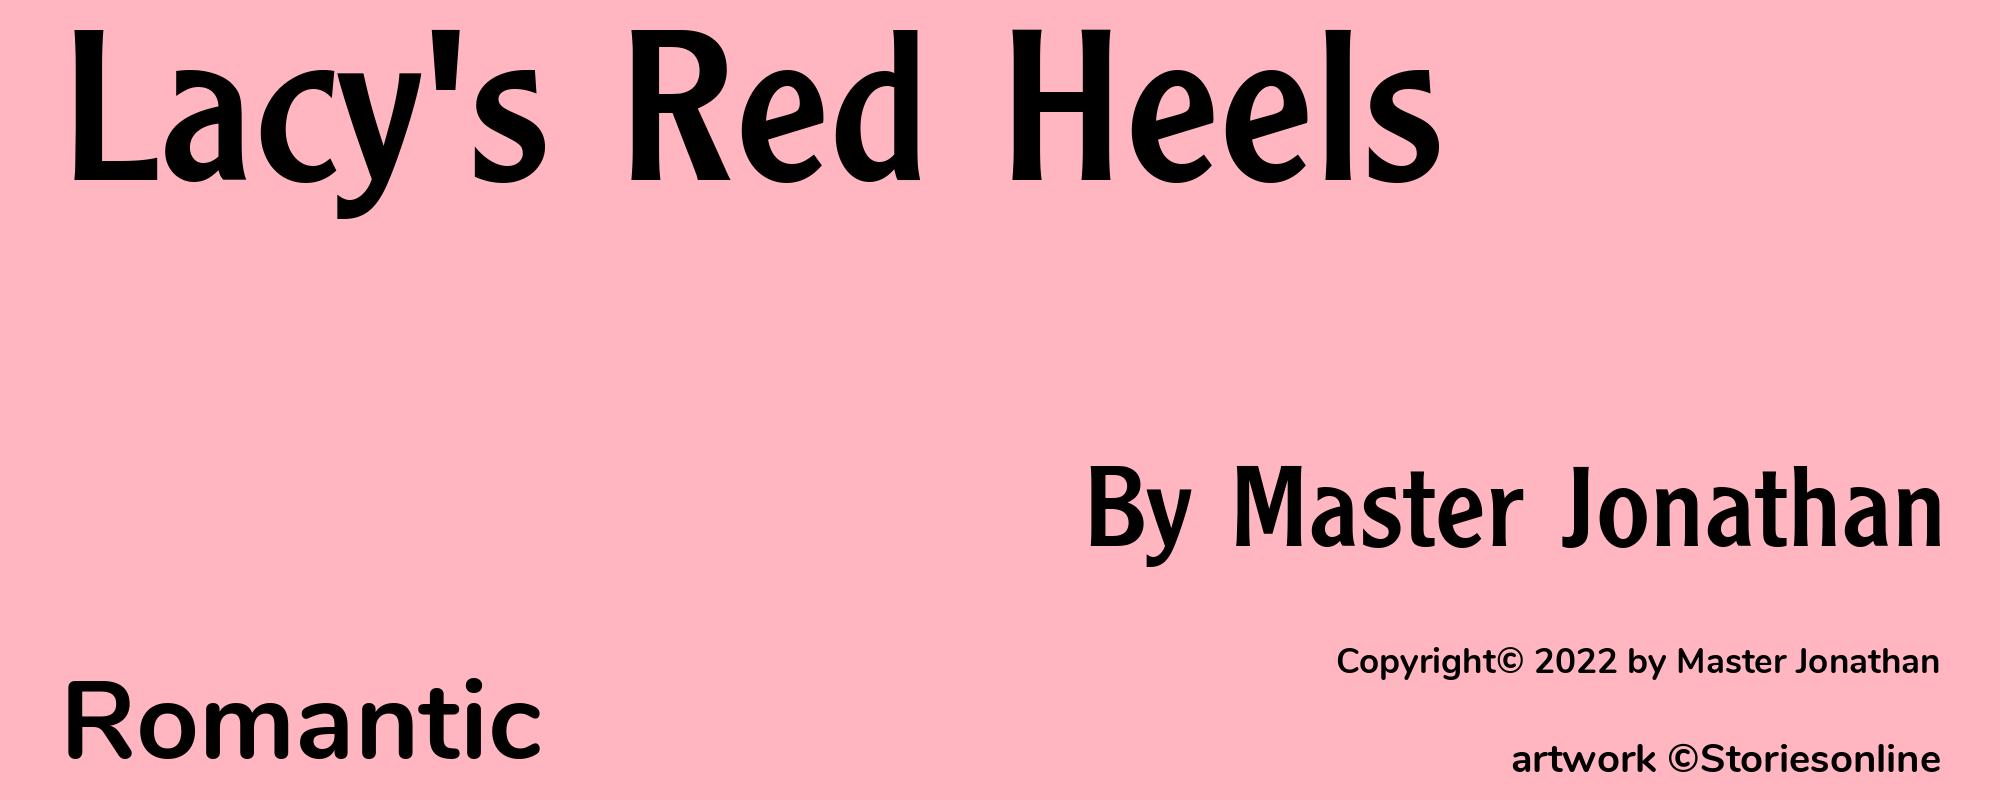 Lacy's Red Heels - Cover